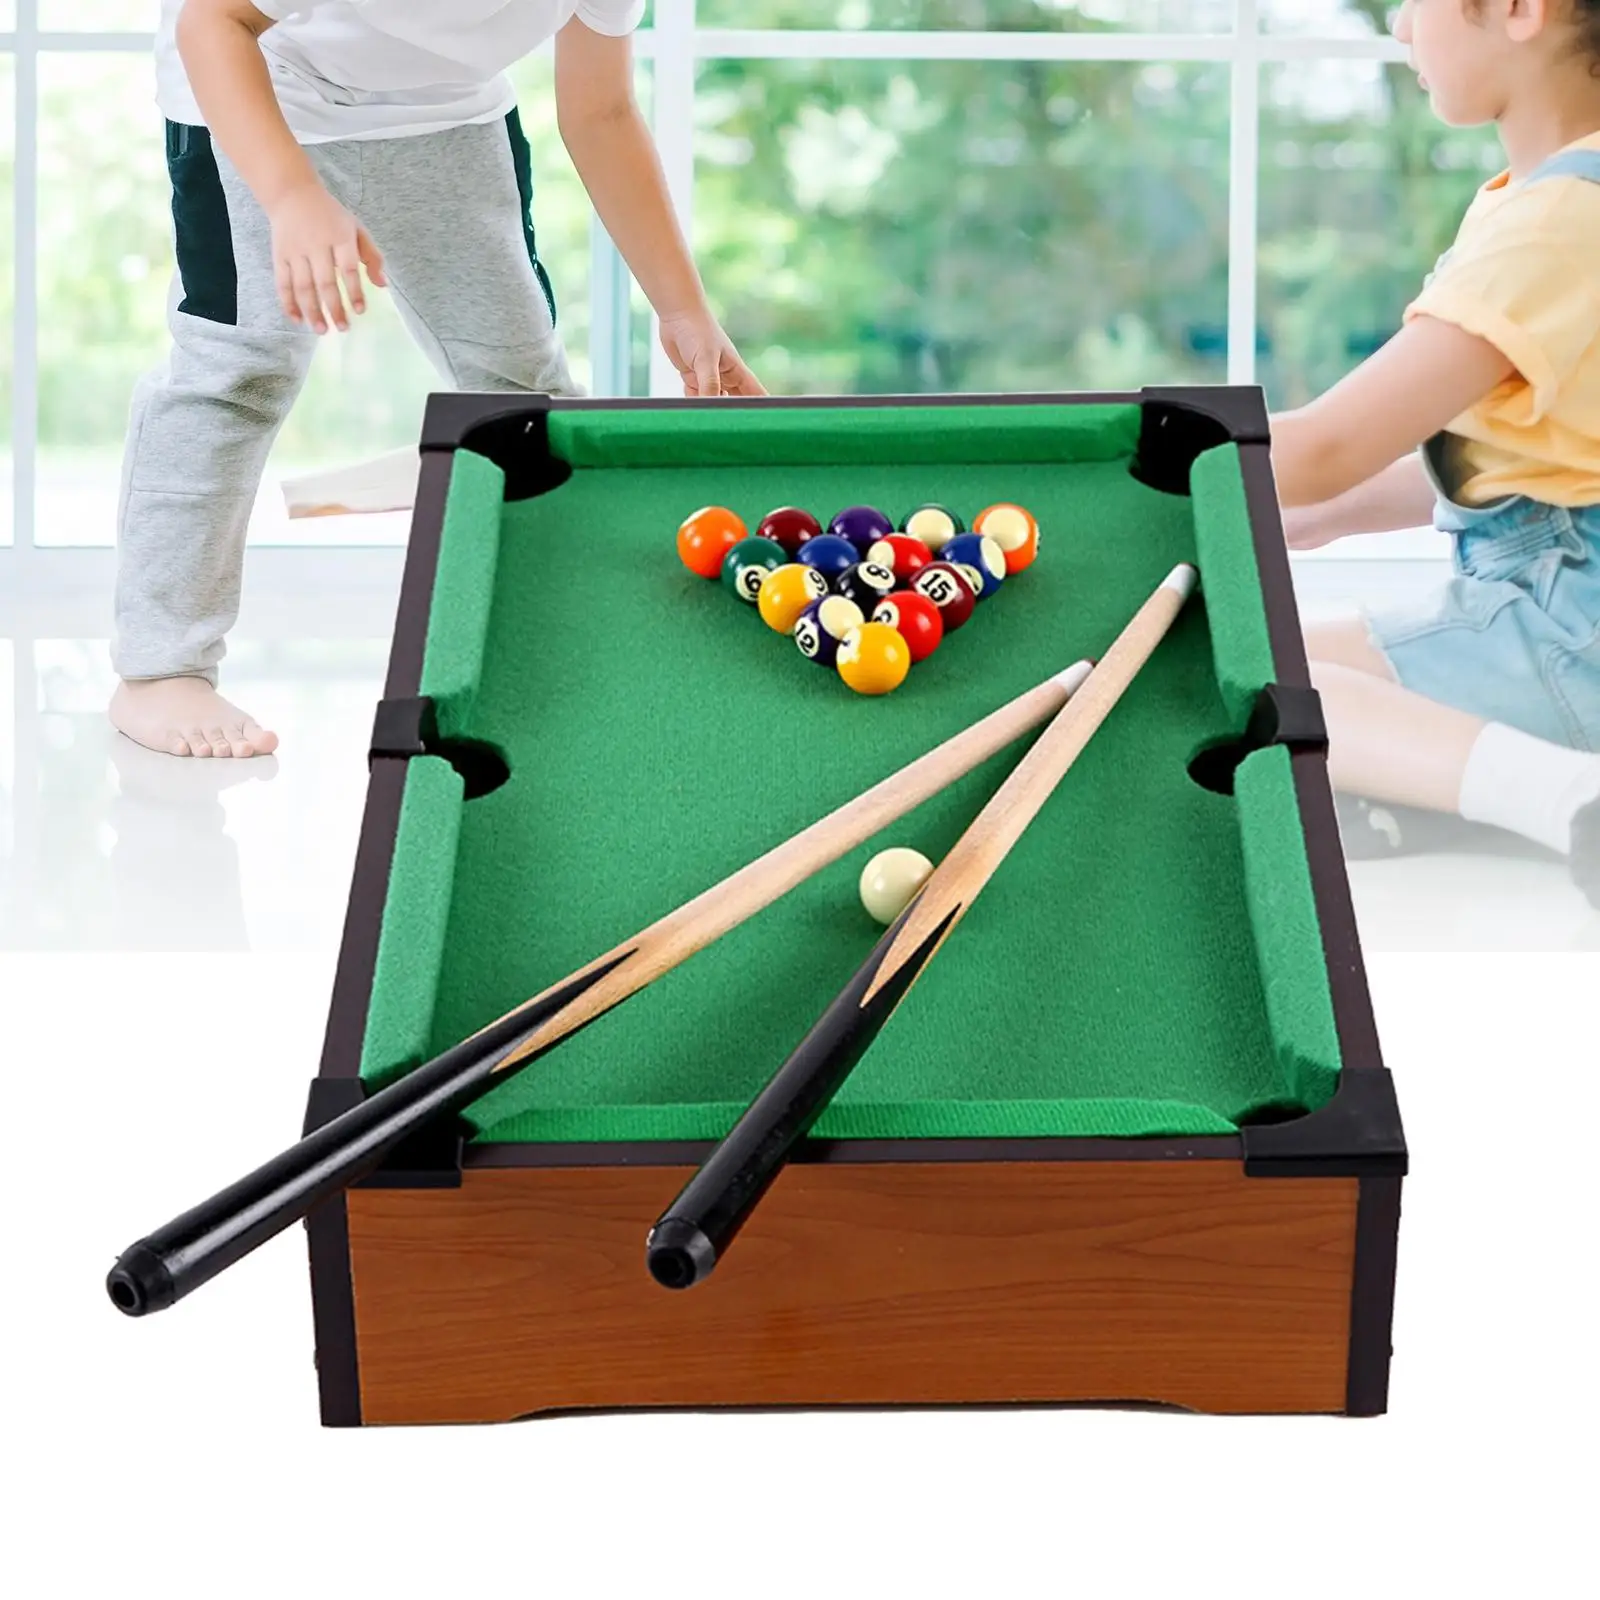 Mini Pool Table Game Portable Wooden Mini Billiards Tabletop Billiards Game Small Billiards Table Great Gift for Boys and Girls